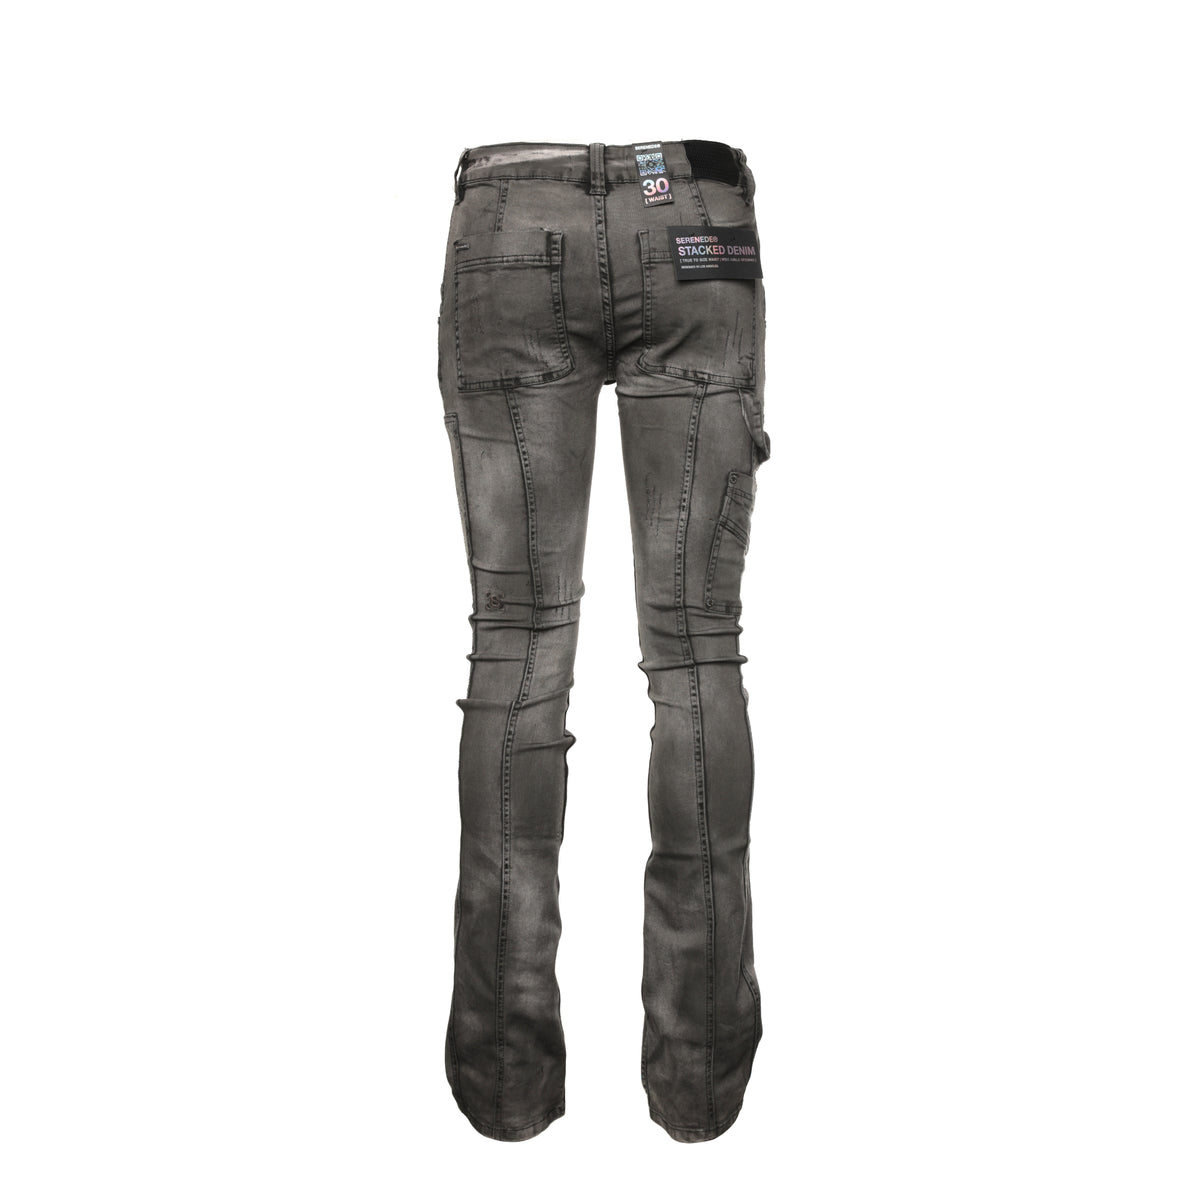 Serenede "Rain" Men's Stacked Jeans - SIZE Boutique